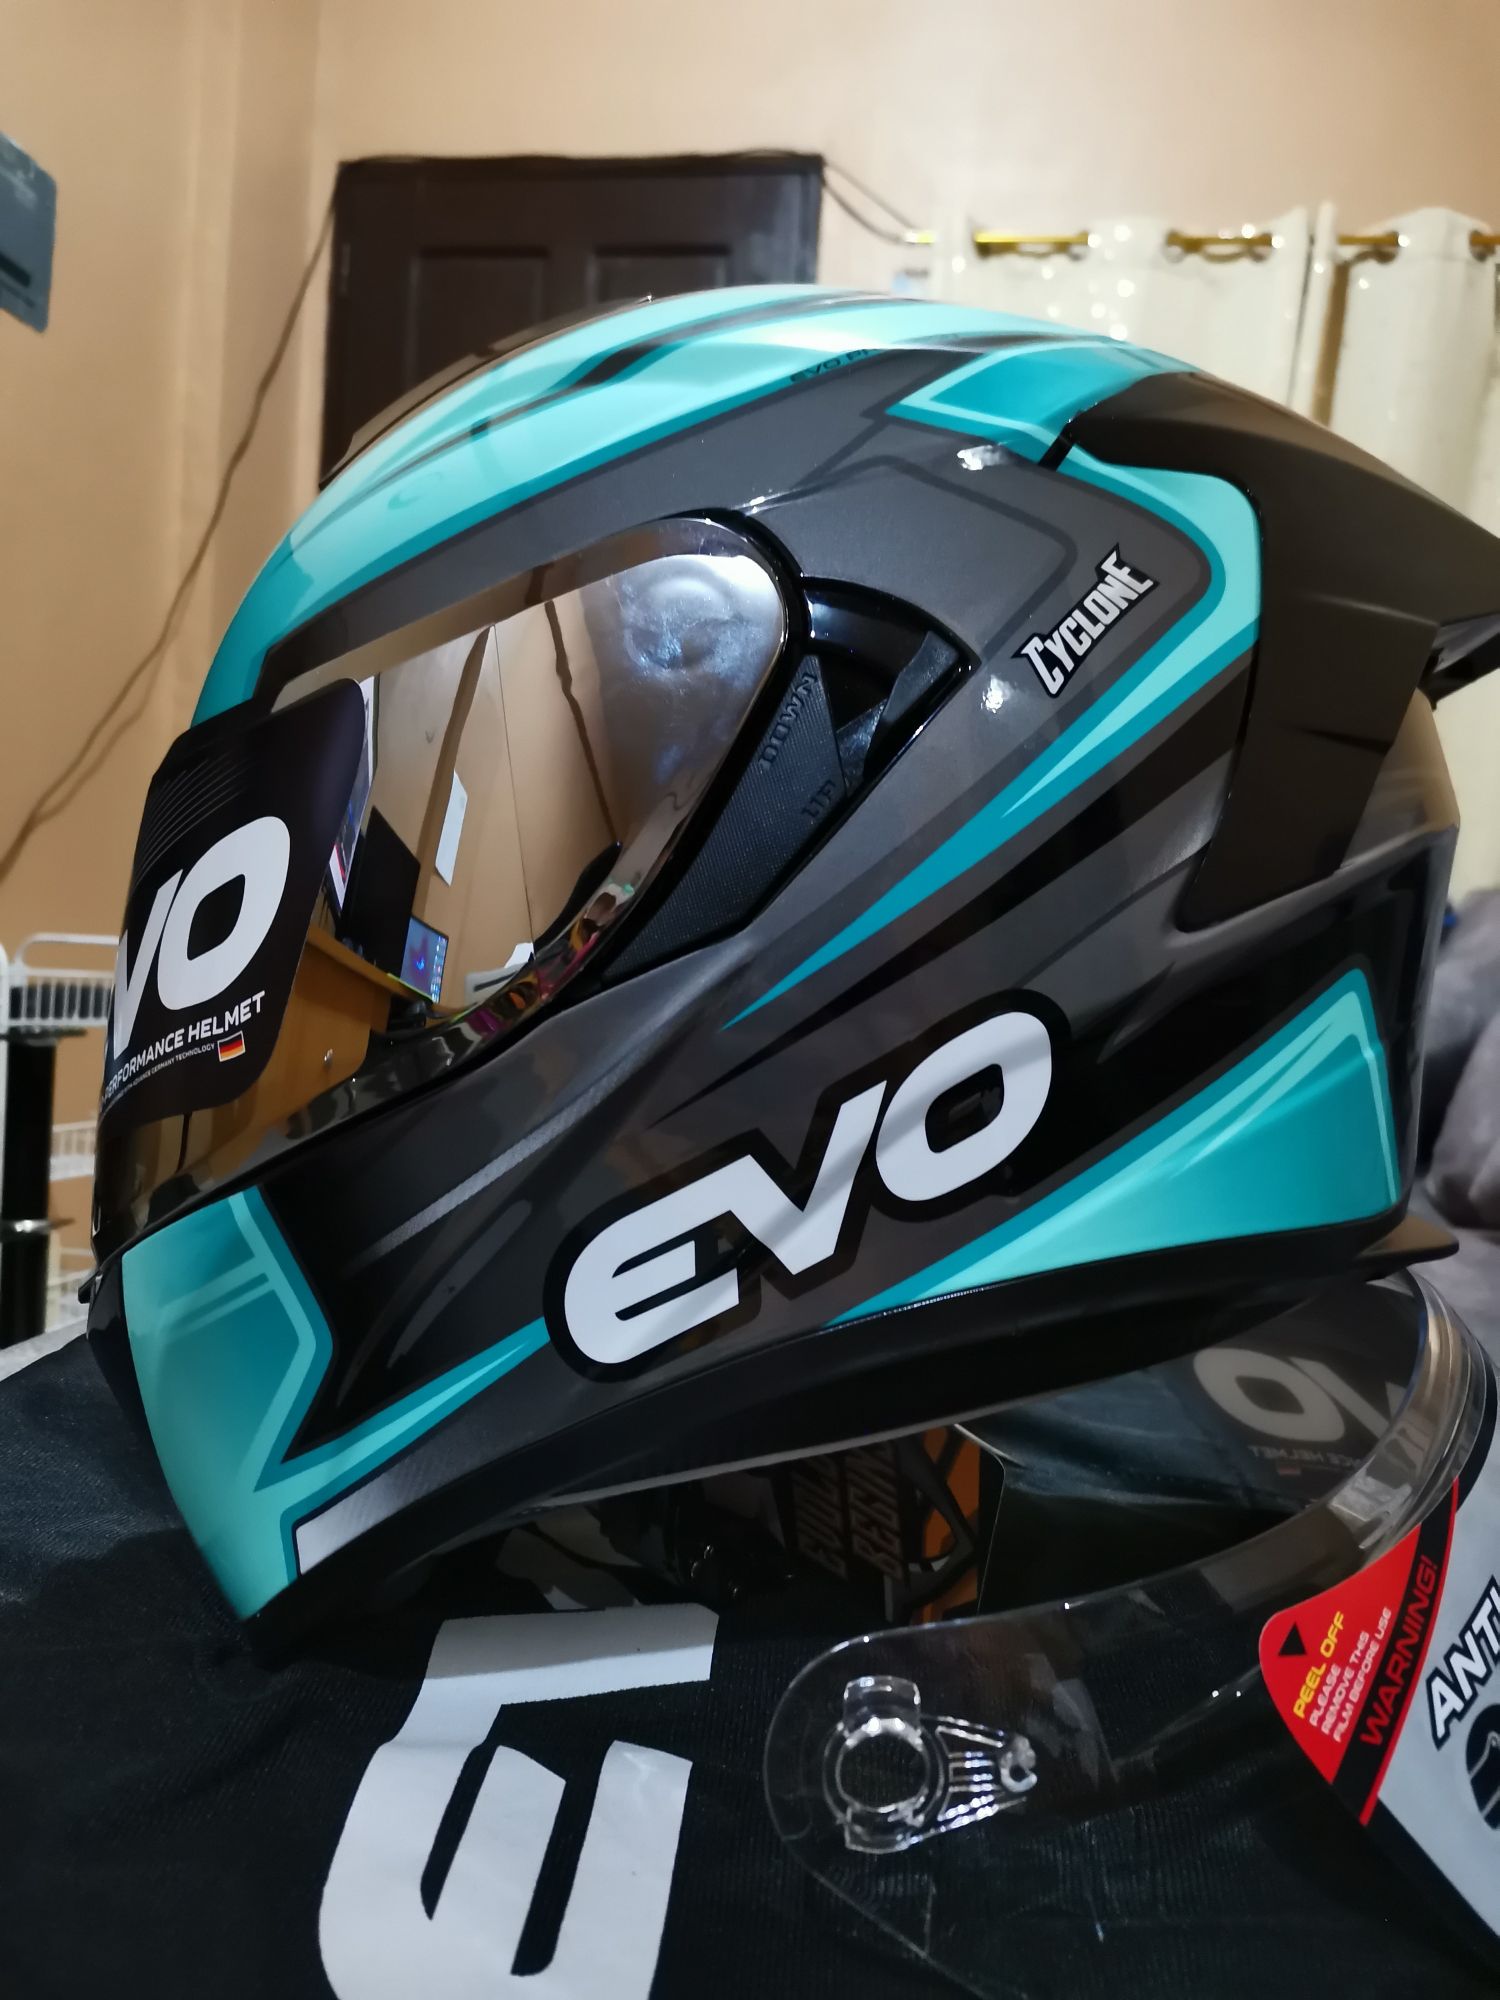 Evo Helmet Gt Pro Cyclone Shop Evo Helmet Gt Pro Cyclone With Great Discounts And Prices Online Lazada Philippines